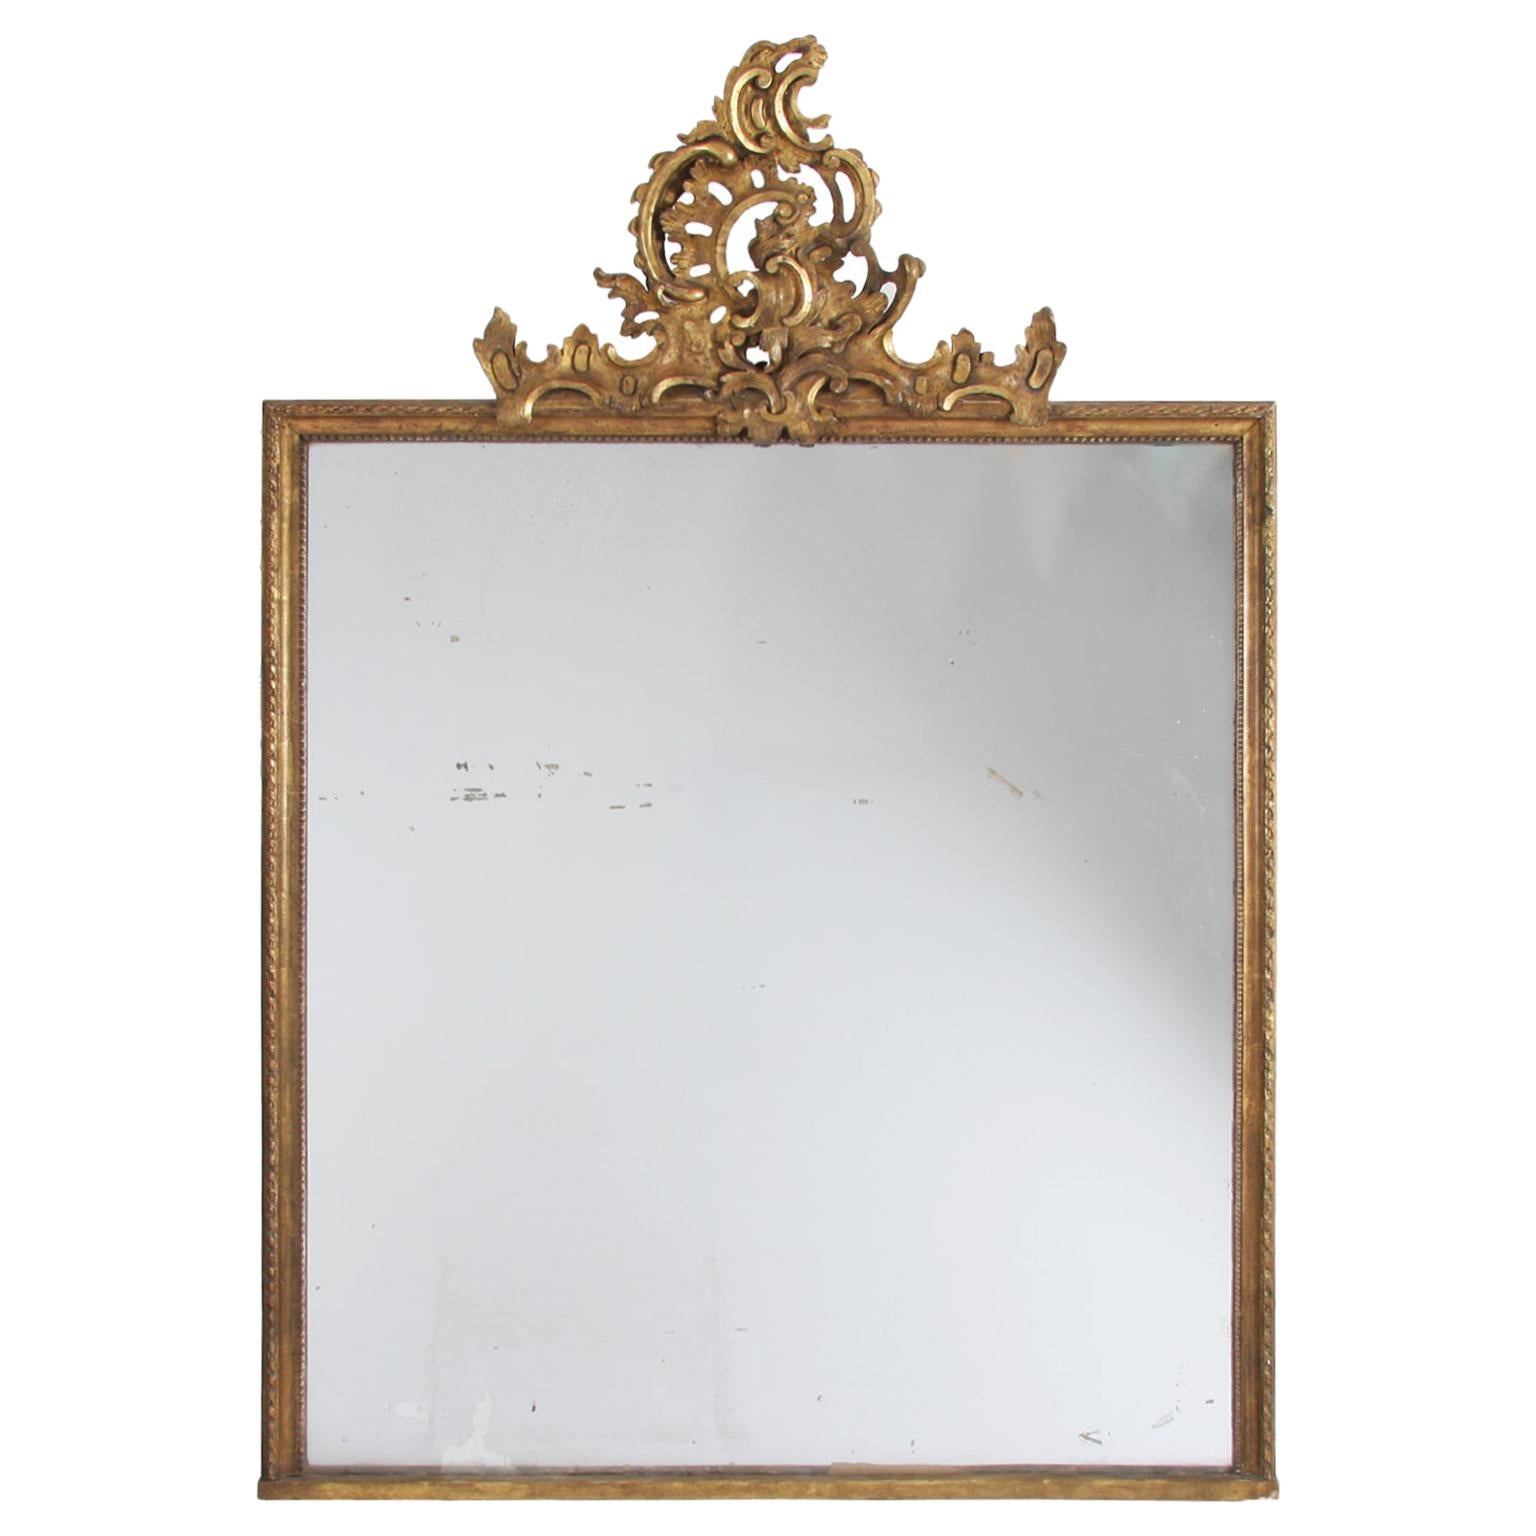 Swedish circa 1900 Giltwood Overmantle Mirror with Crest and Mercury Glass